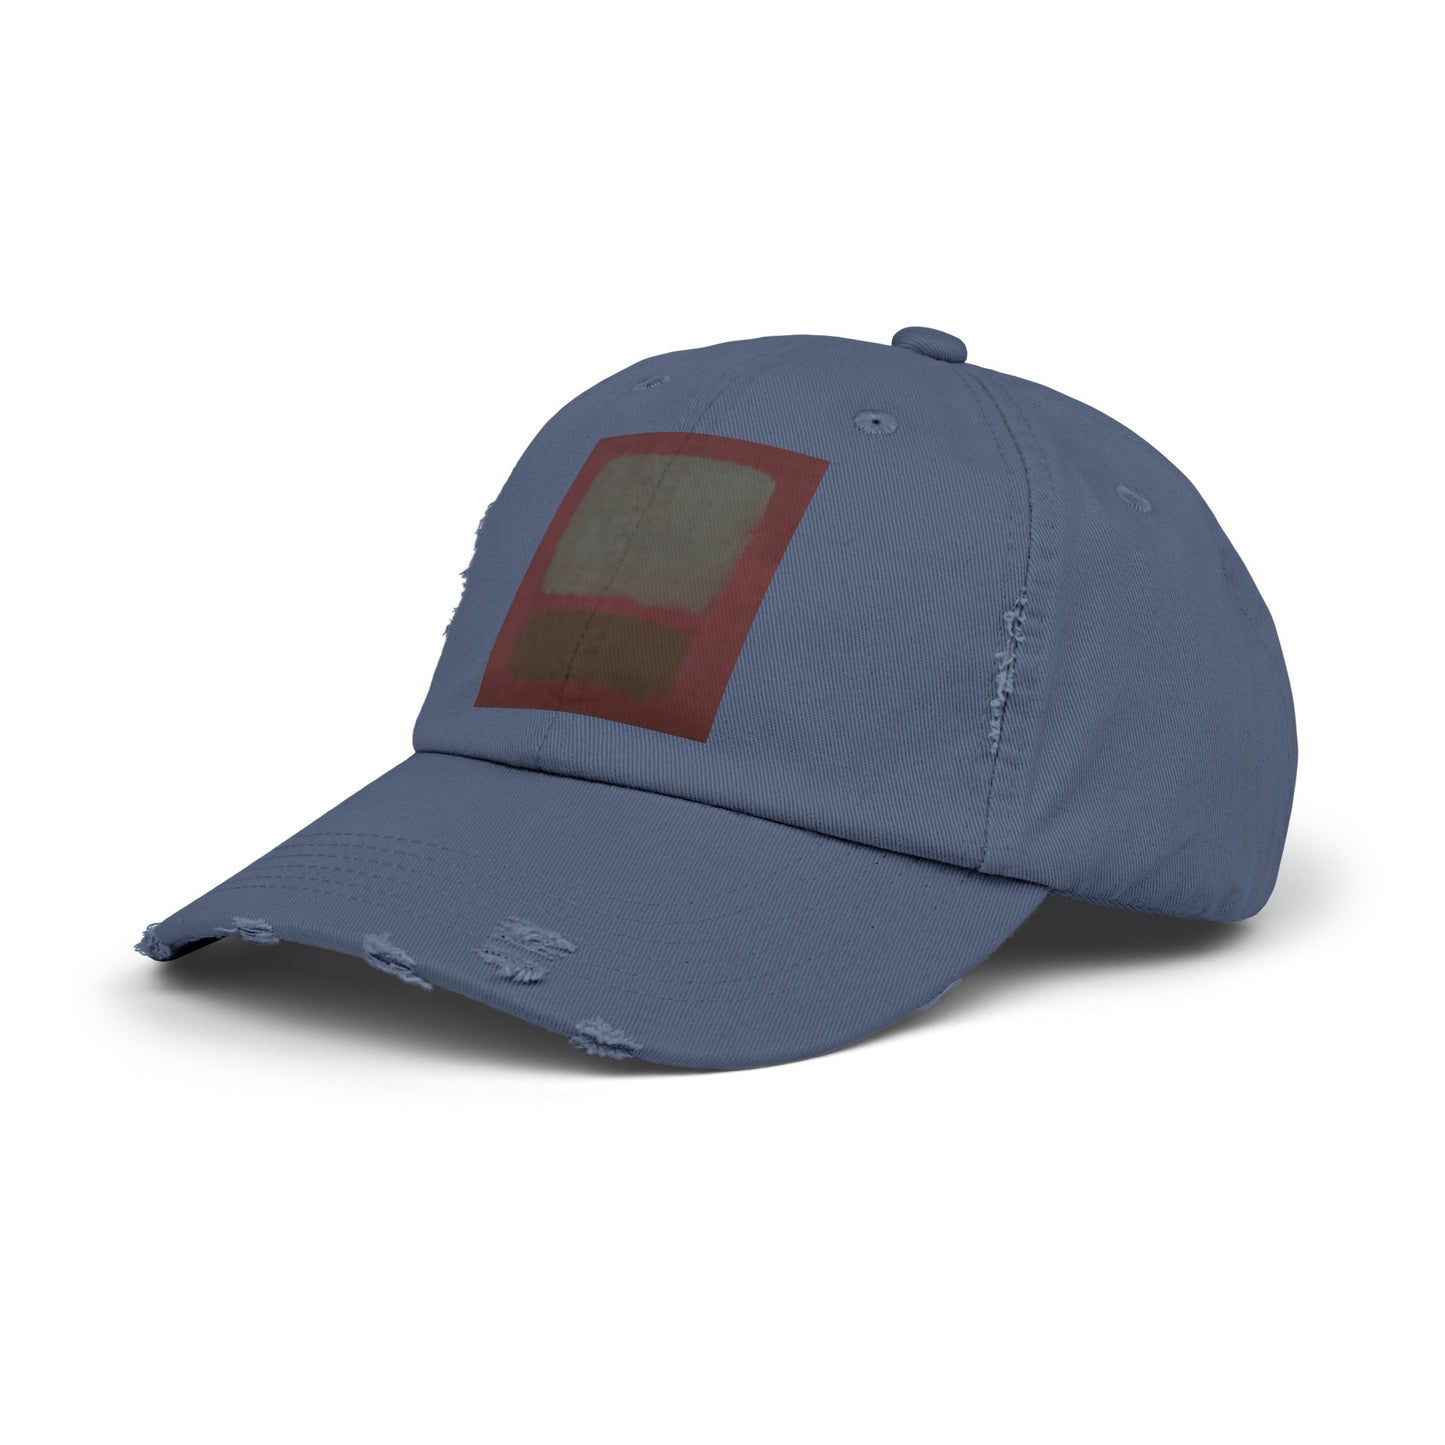 a blue hat with a red patch on the front of it